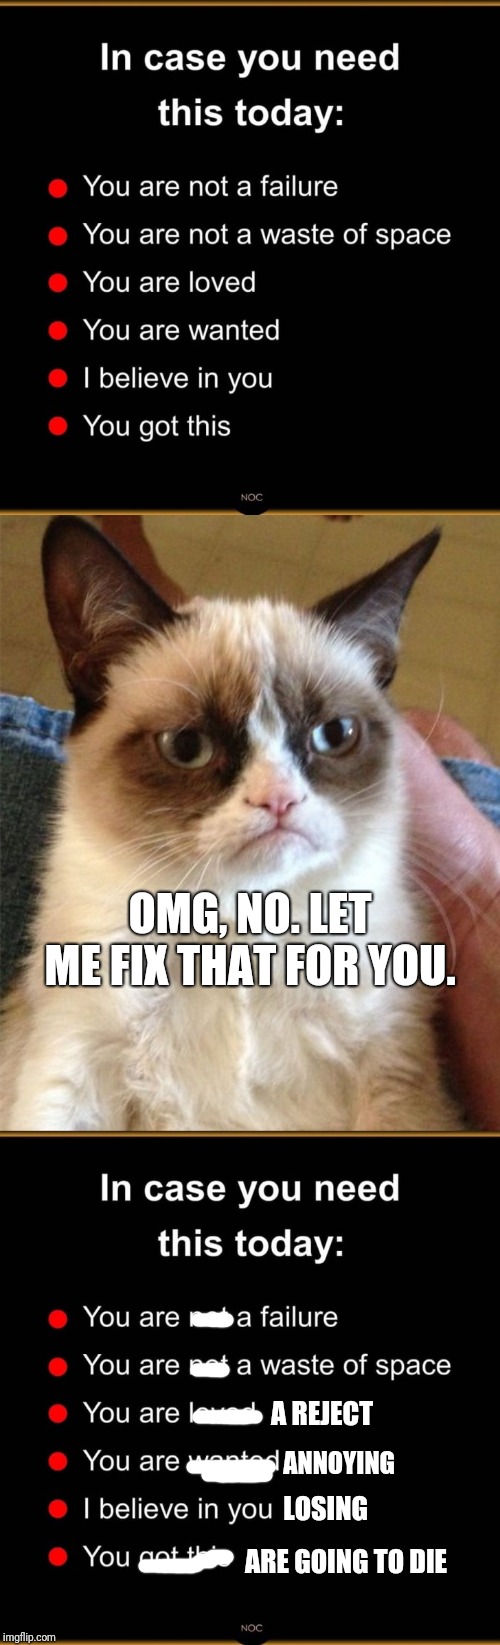 I couldn't resist :D | OMG, NO. LET ME FIX THAT FOR YOU. A REJECT; ANNOYING; LOSING; ARE GOING TO DIE | image tagged in memes,grumpy cat,lol,funny memes,you suck,wtf | made w/ Imgflip meme maker